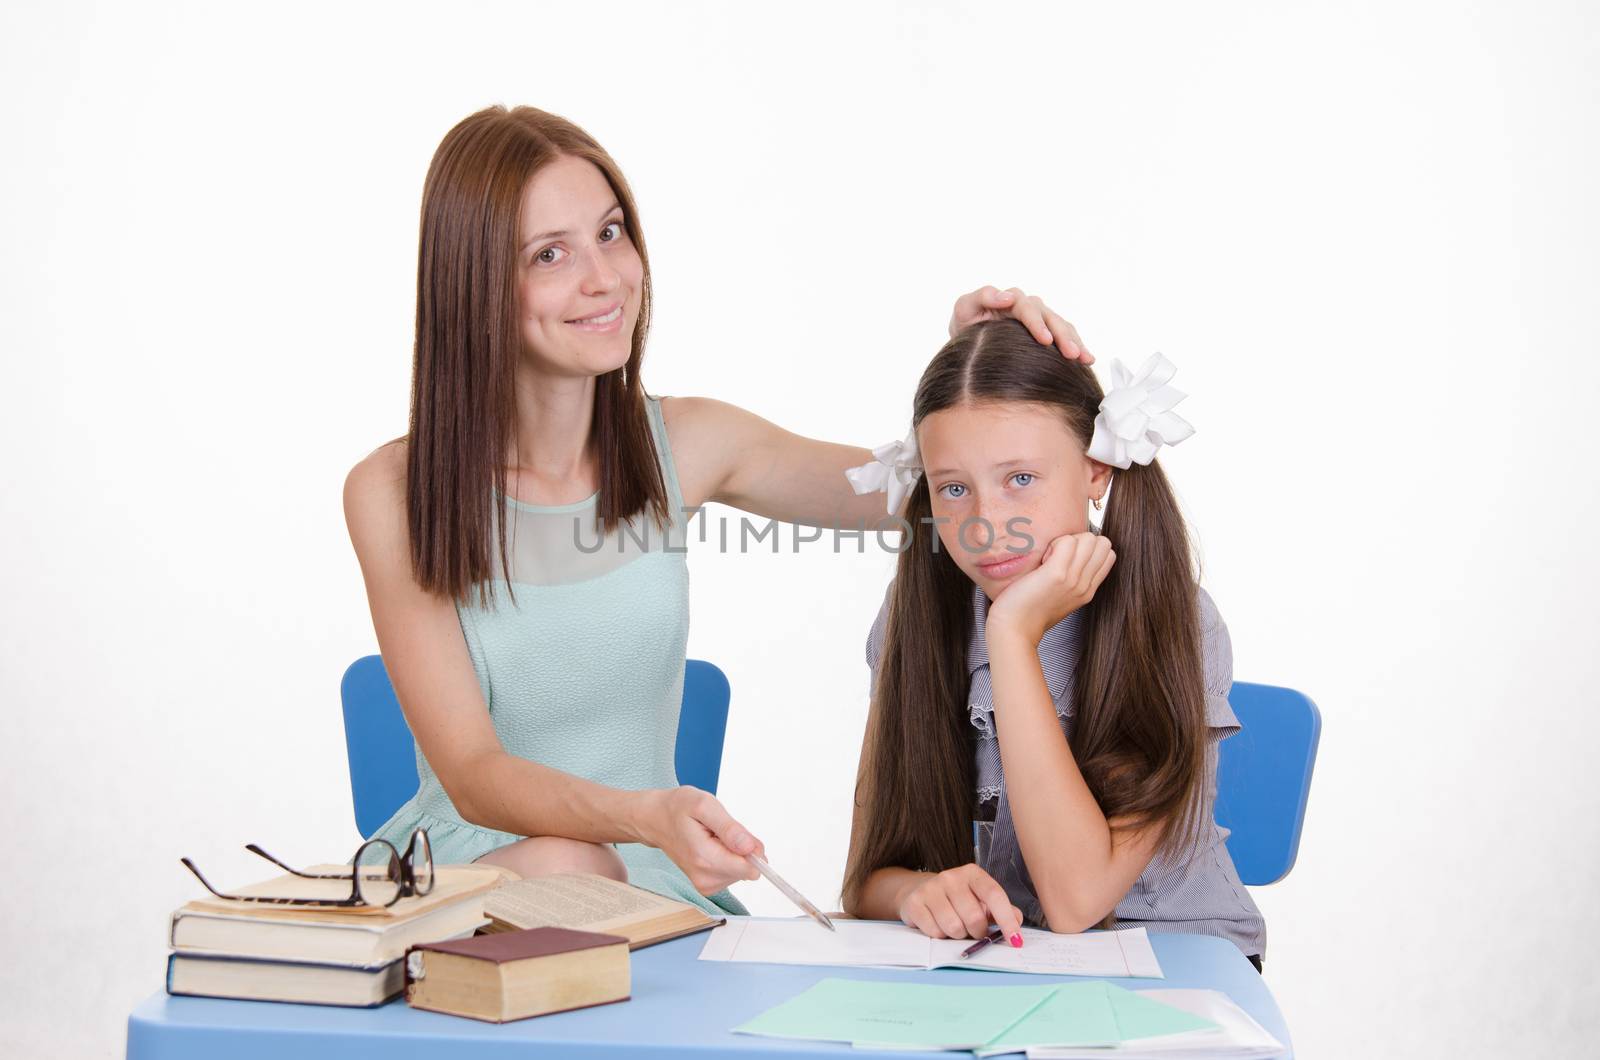 The teacher teaches the student sitting with him at the table